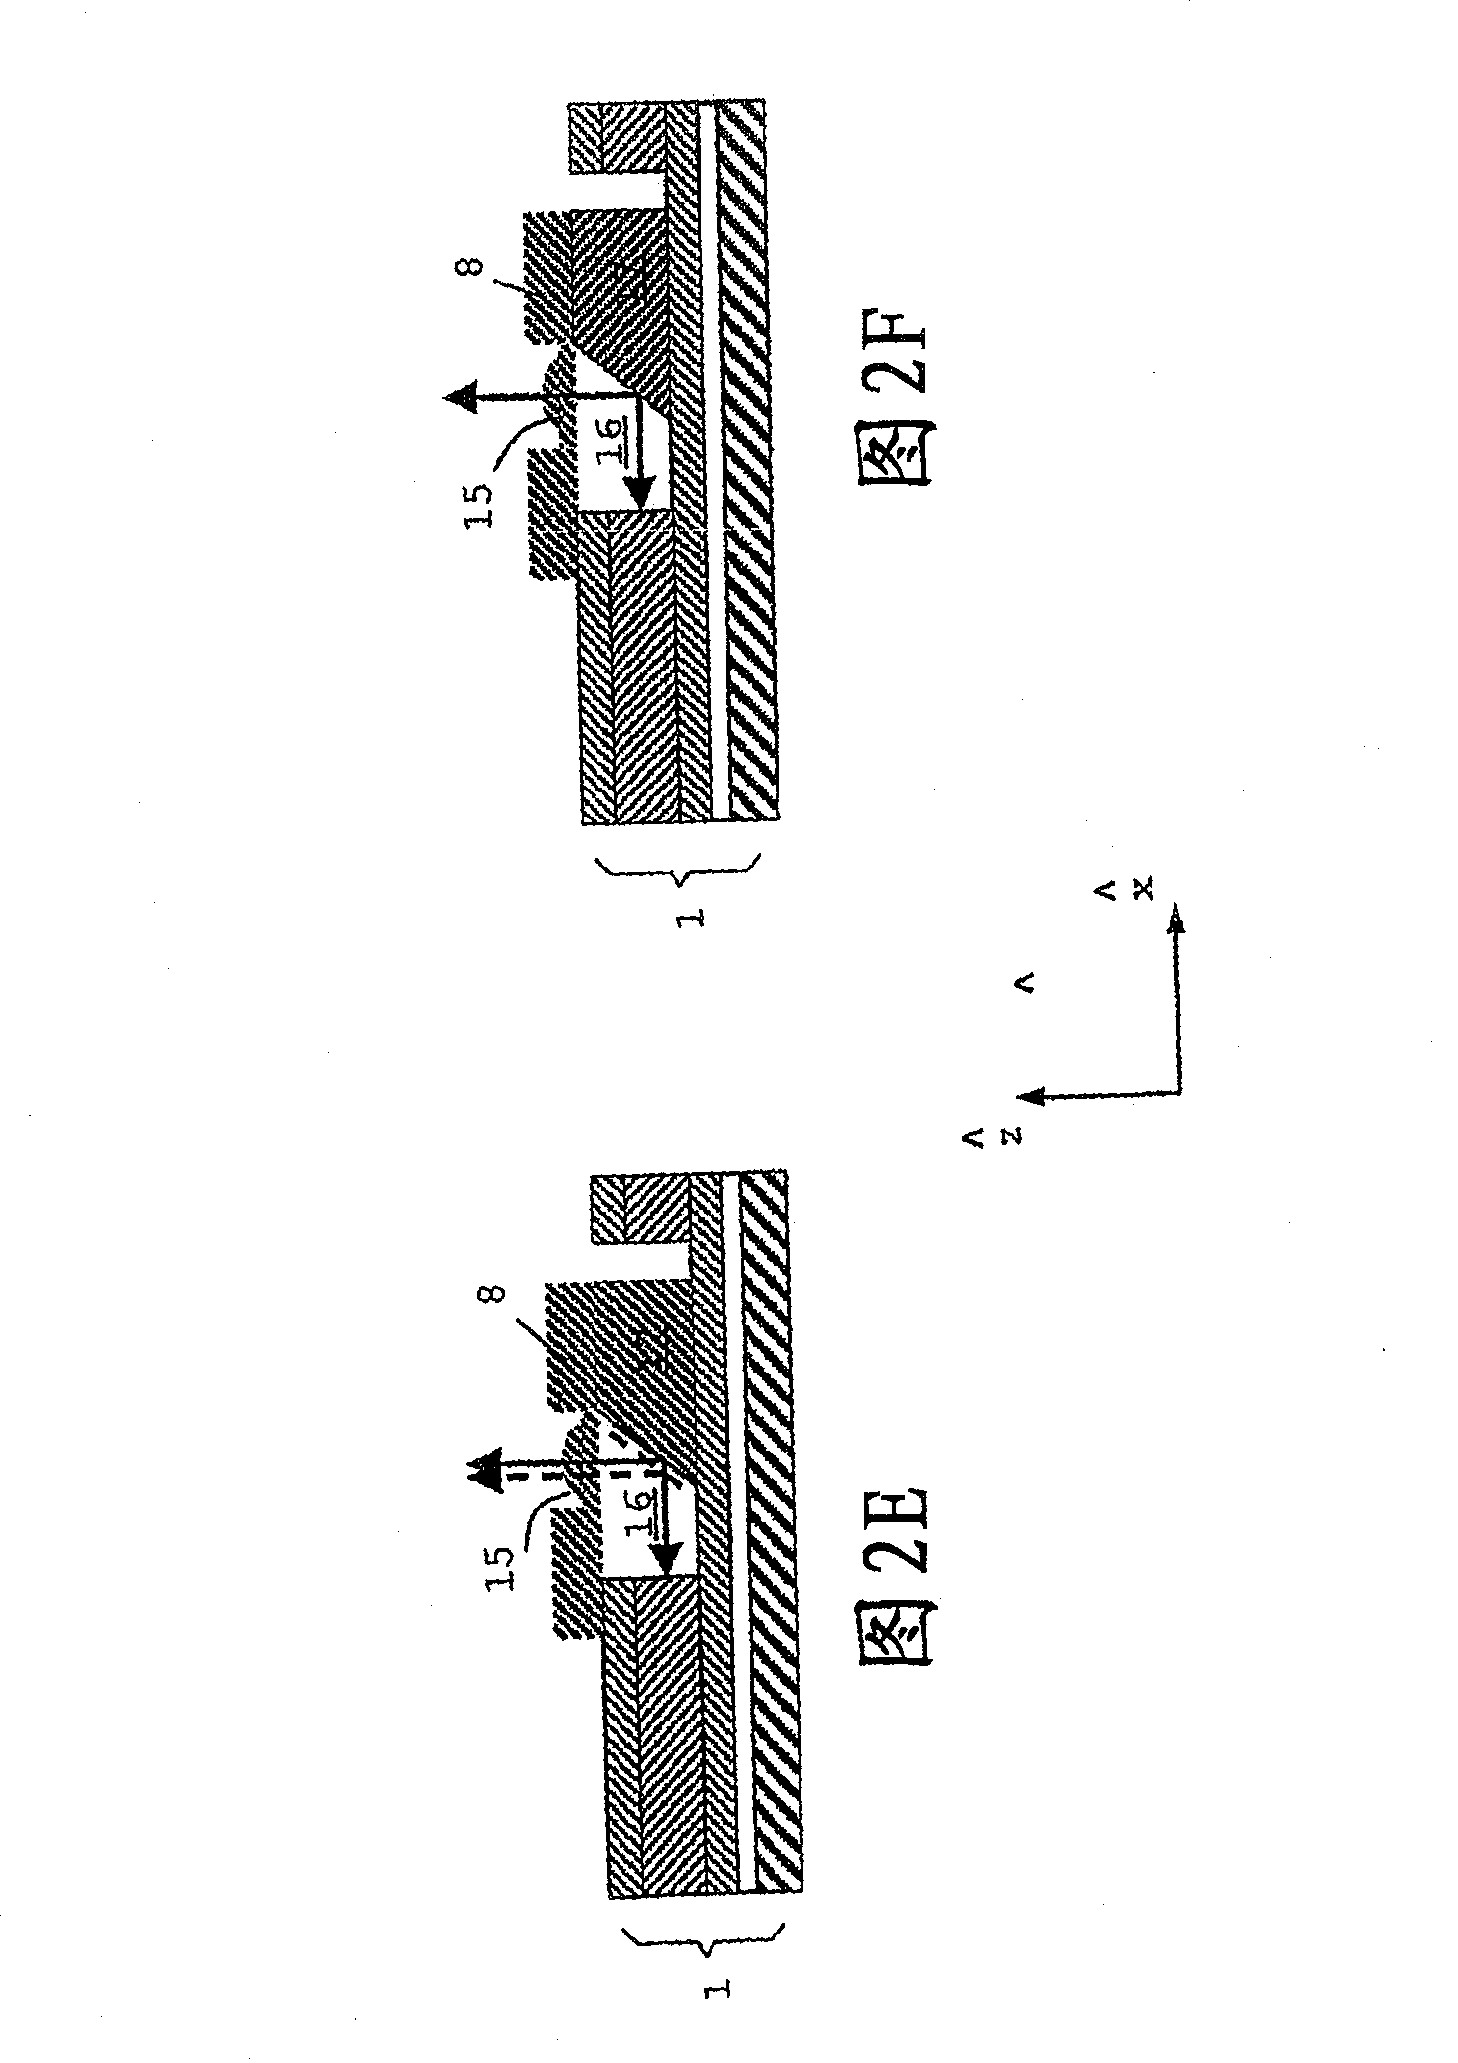 Optical connector assembly, coupling device and method for aligning such a coupling device and a waveguide structure